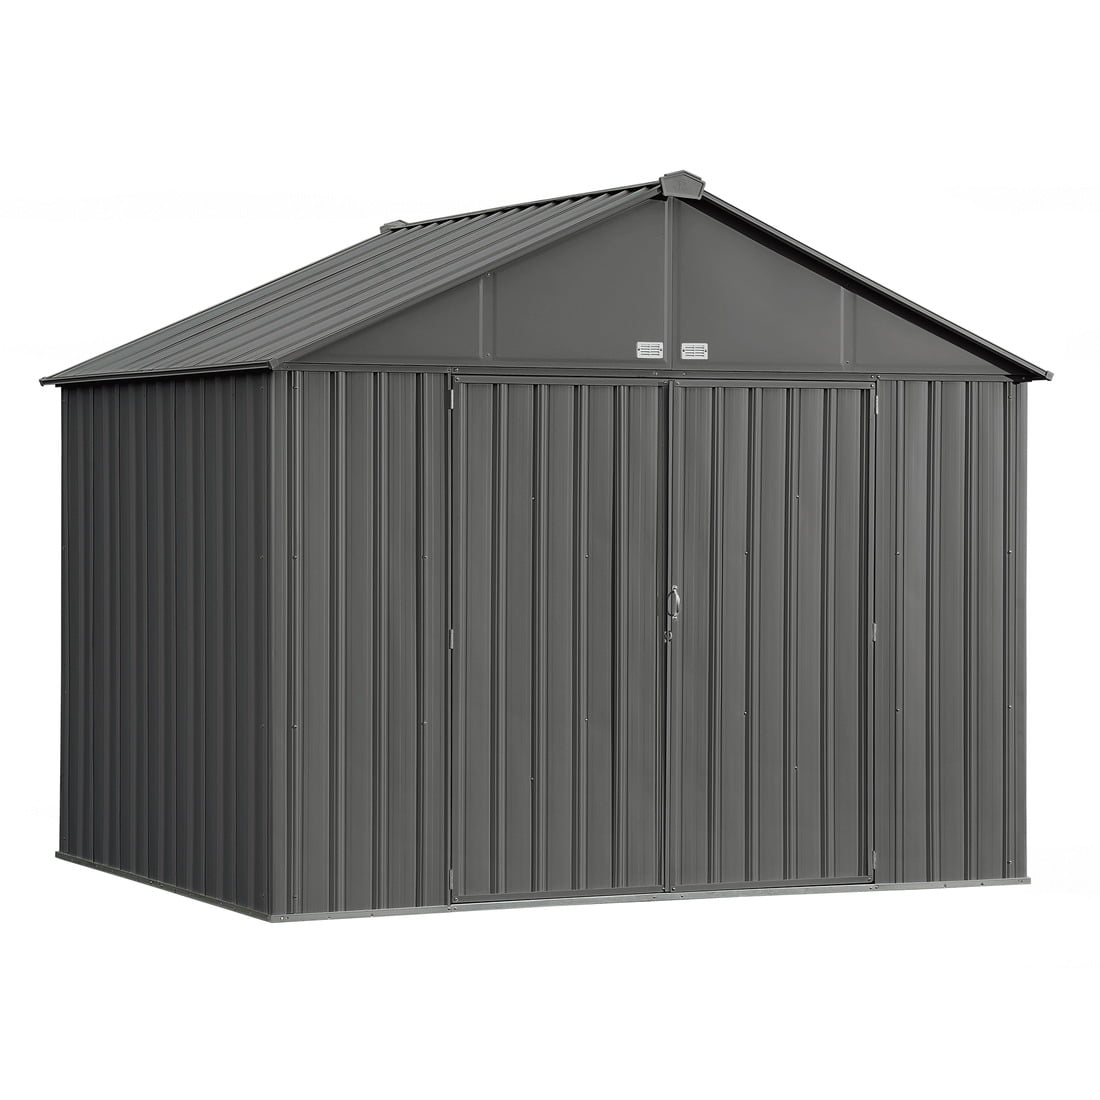 Ez 10X8, Extra High Gable, 72 In Walls, Vents, Charcoal